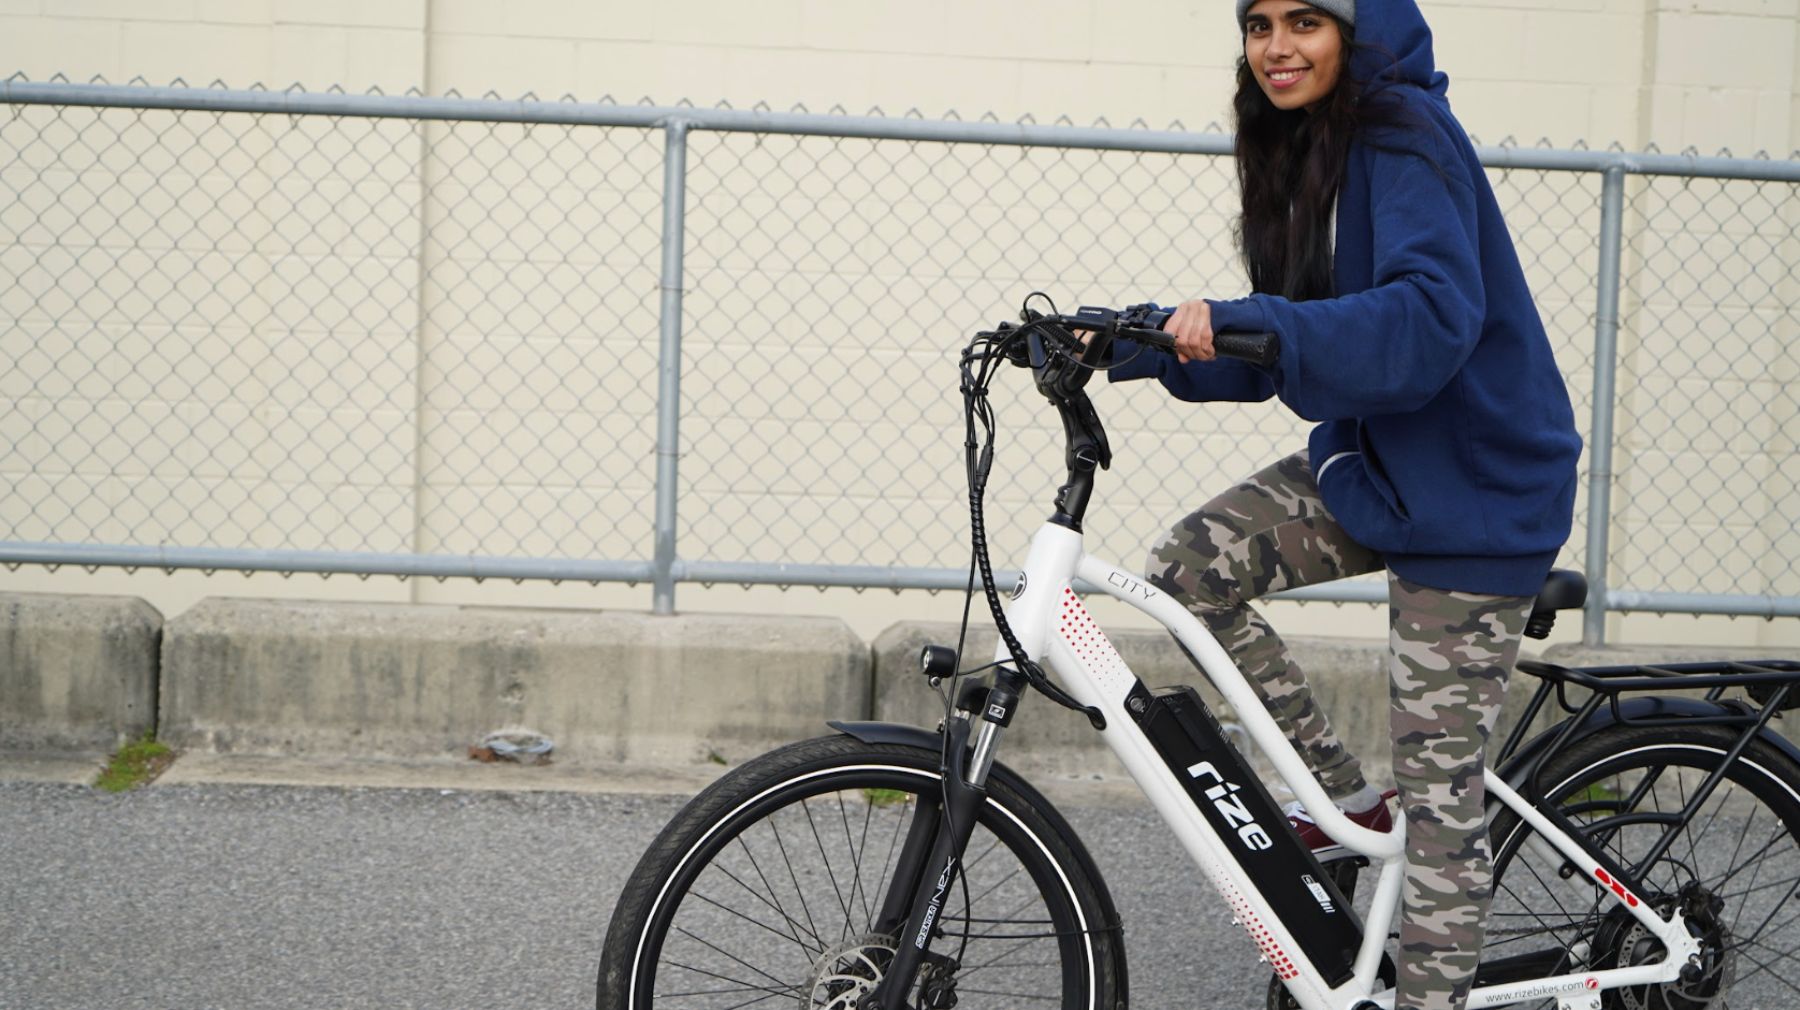 What Are The Benefits Of Riding An Electric Bicycle?